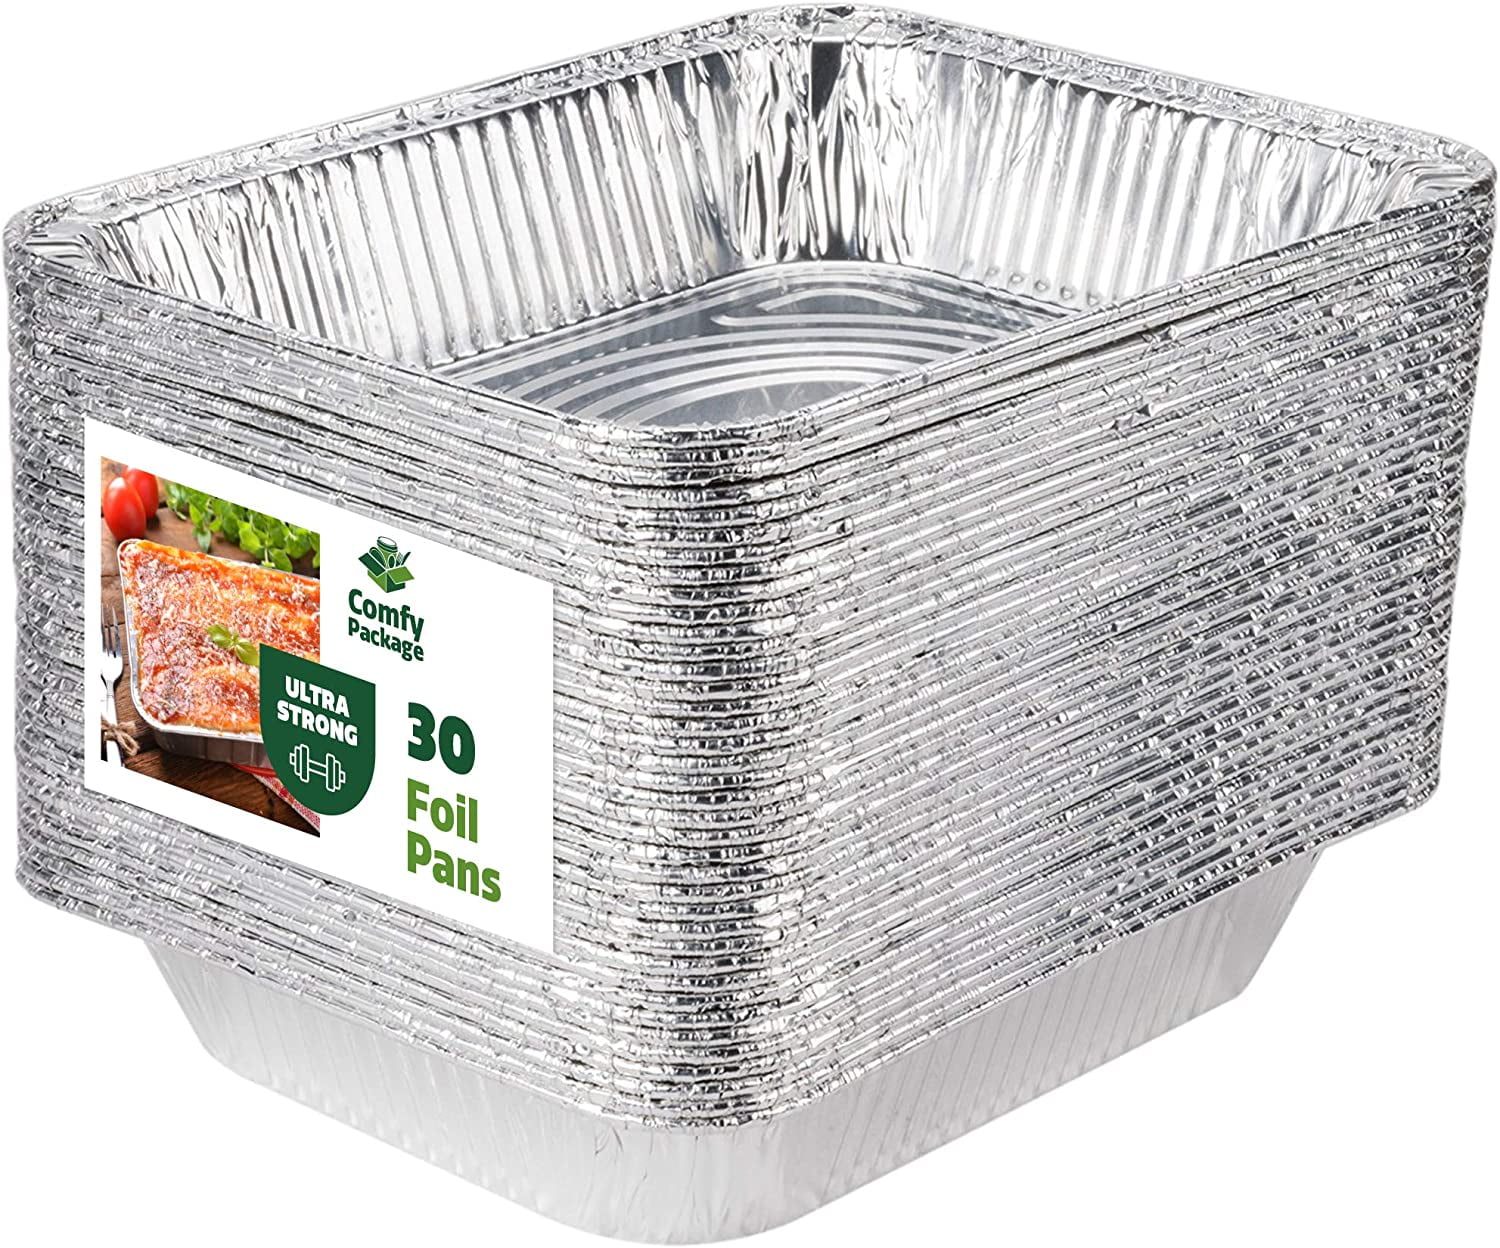 Aluminum Pans 9x13 [30 Pack] Aluminum Foil Pans Trays - Disposable Pans for Baking, BBQ Grilling, Roasting, Cake Serving Dishes, Catering Supplies